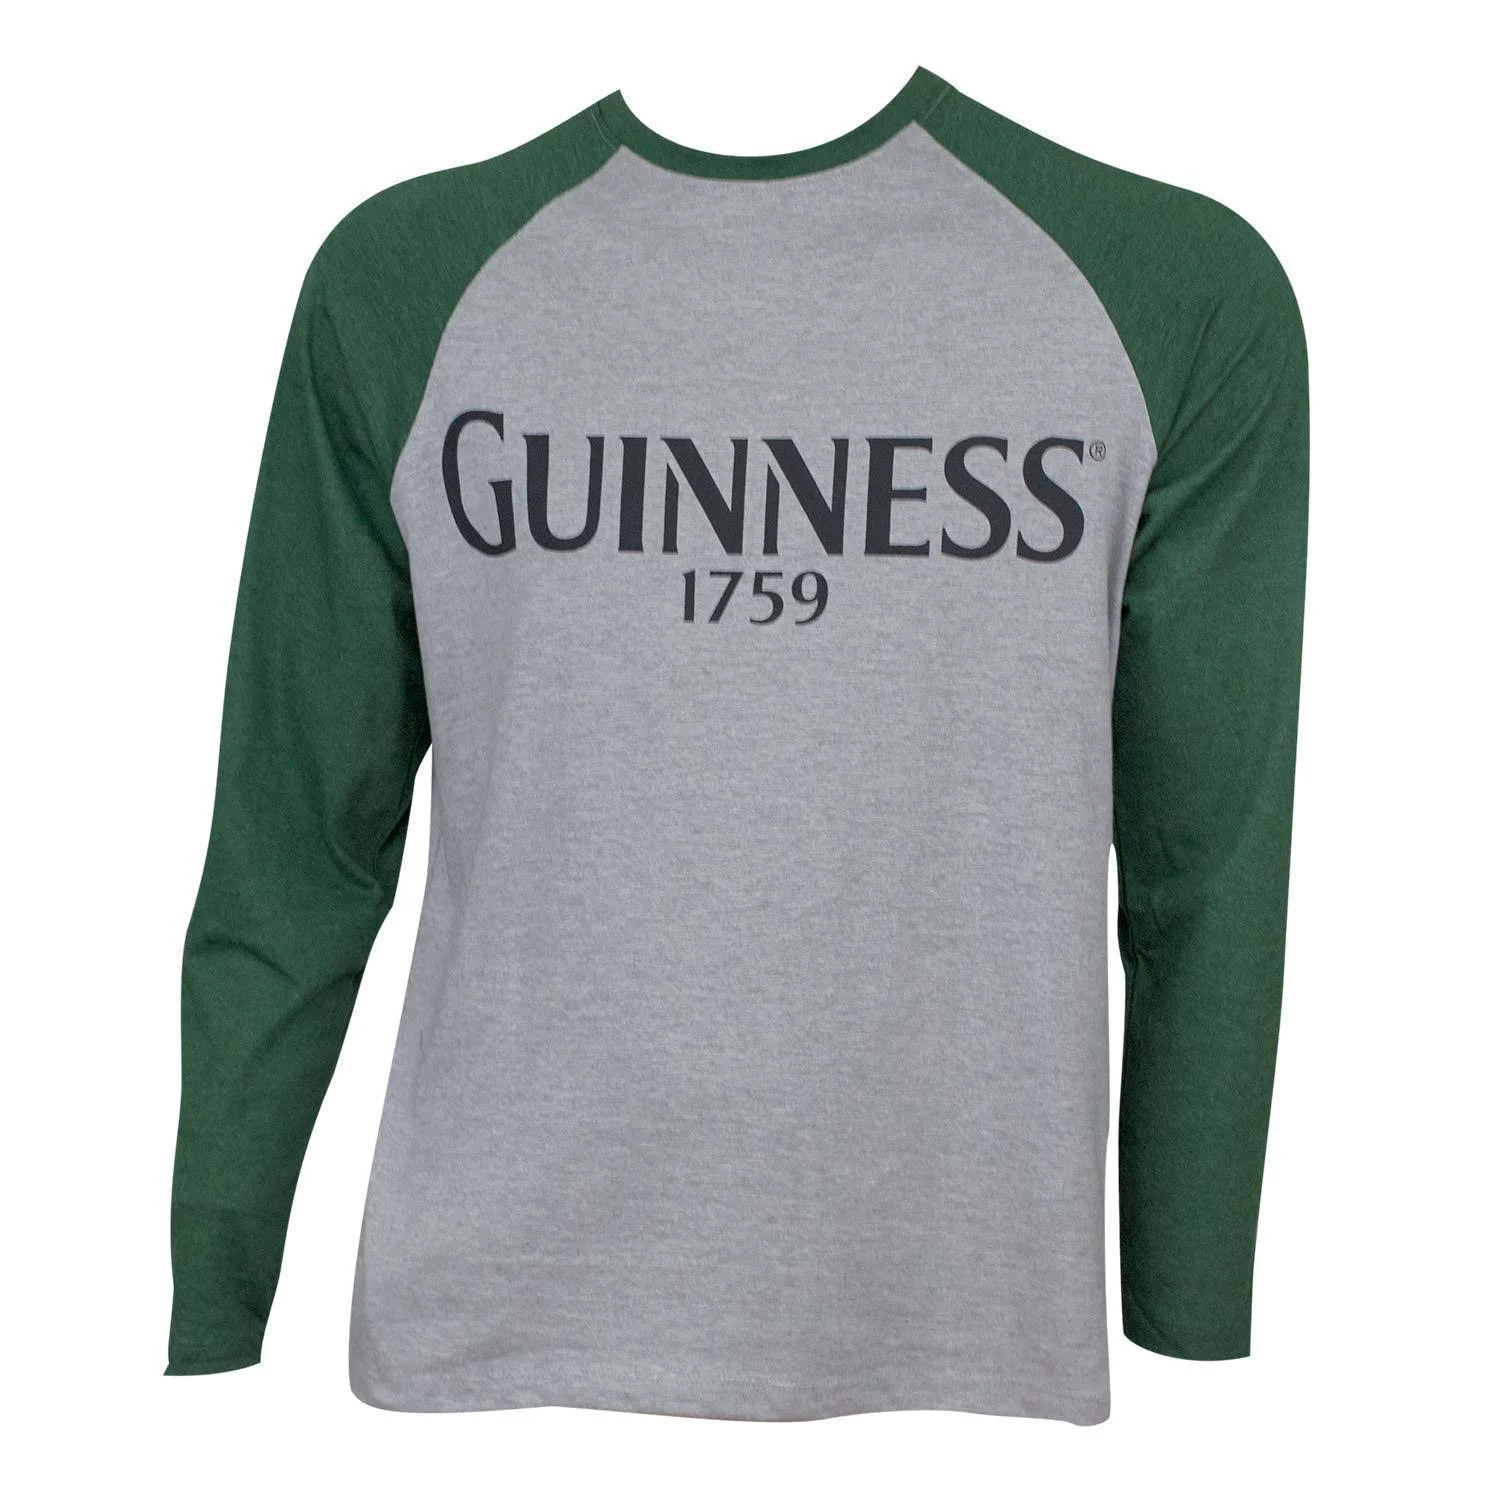 Personalized Tee Shirts - Bangladesh Factory, Suppliers, Manufacturers